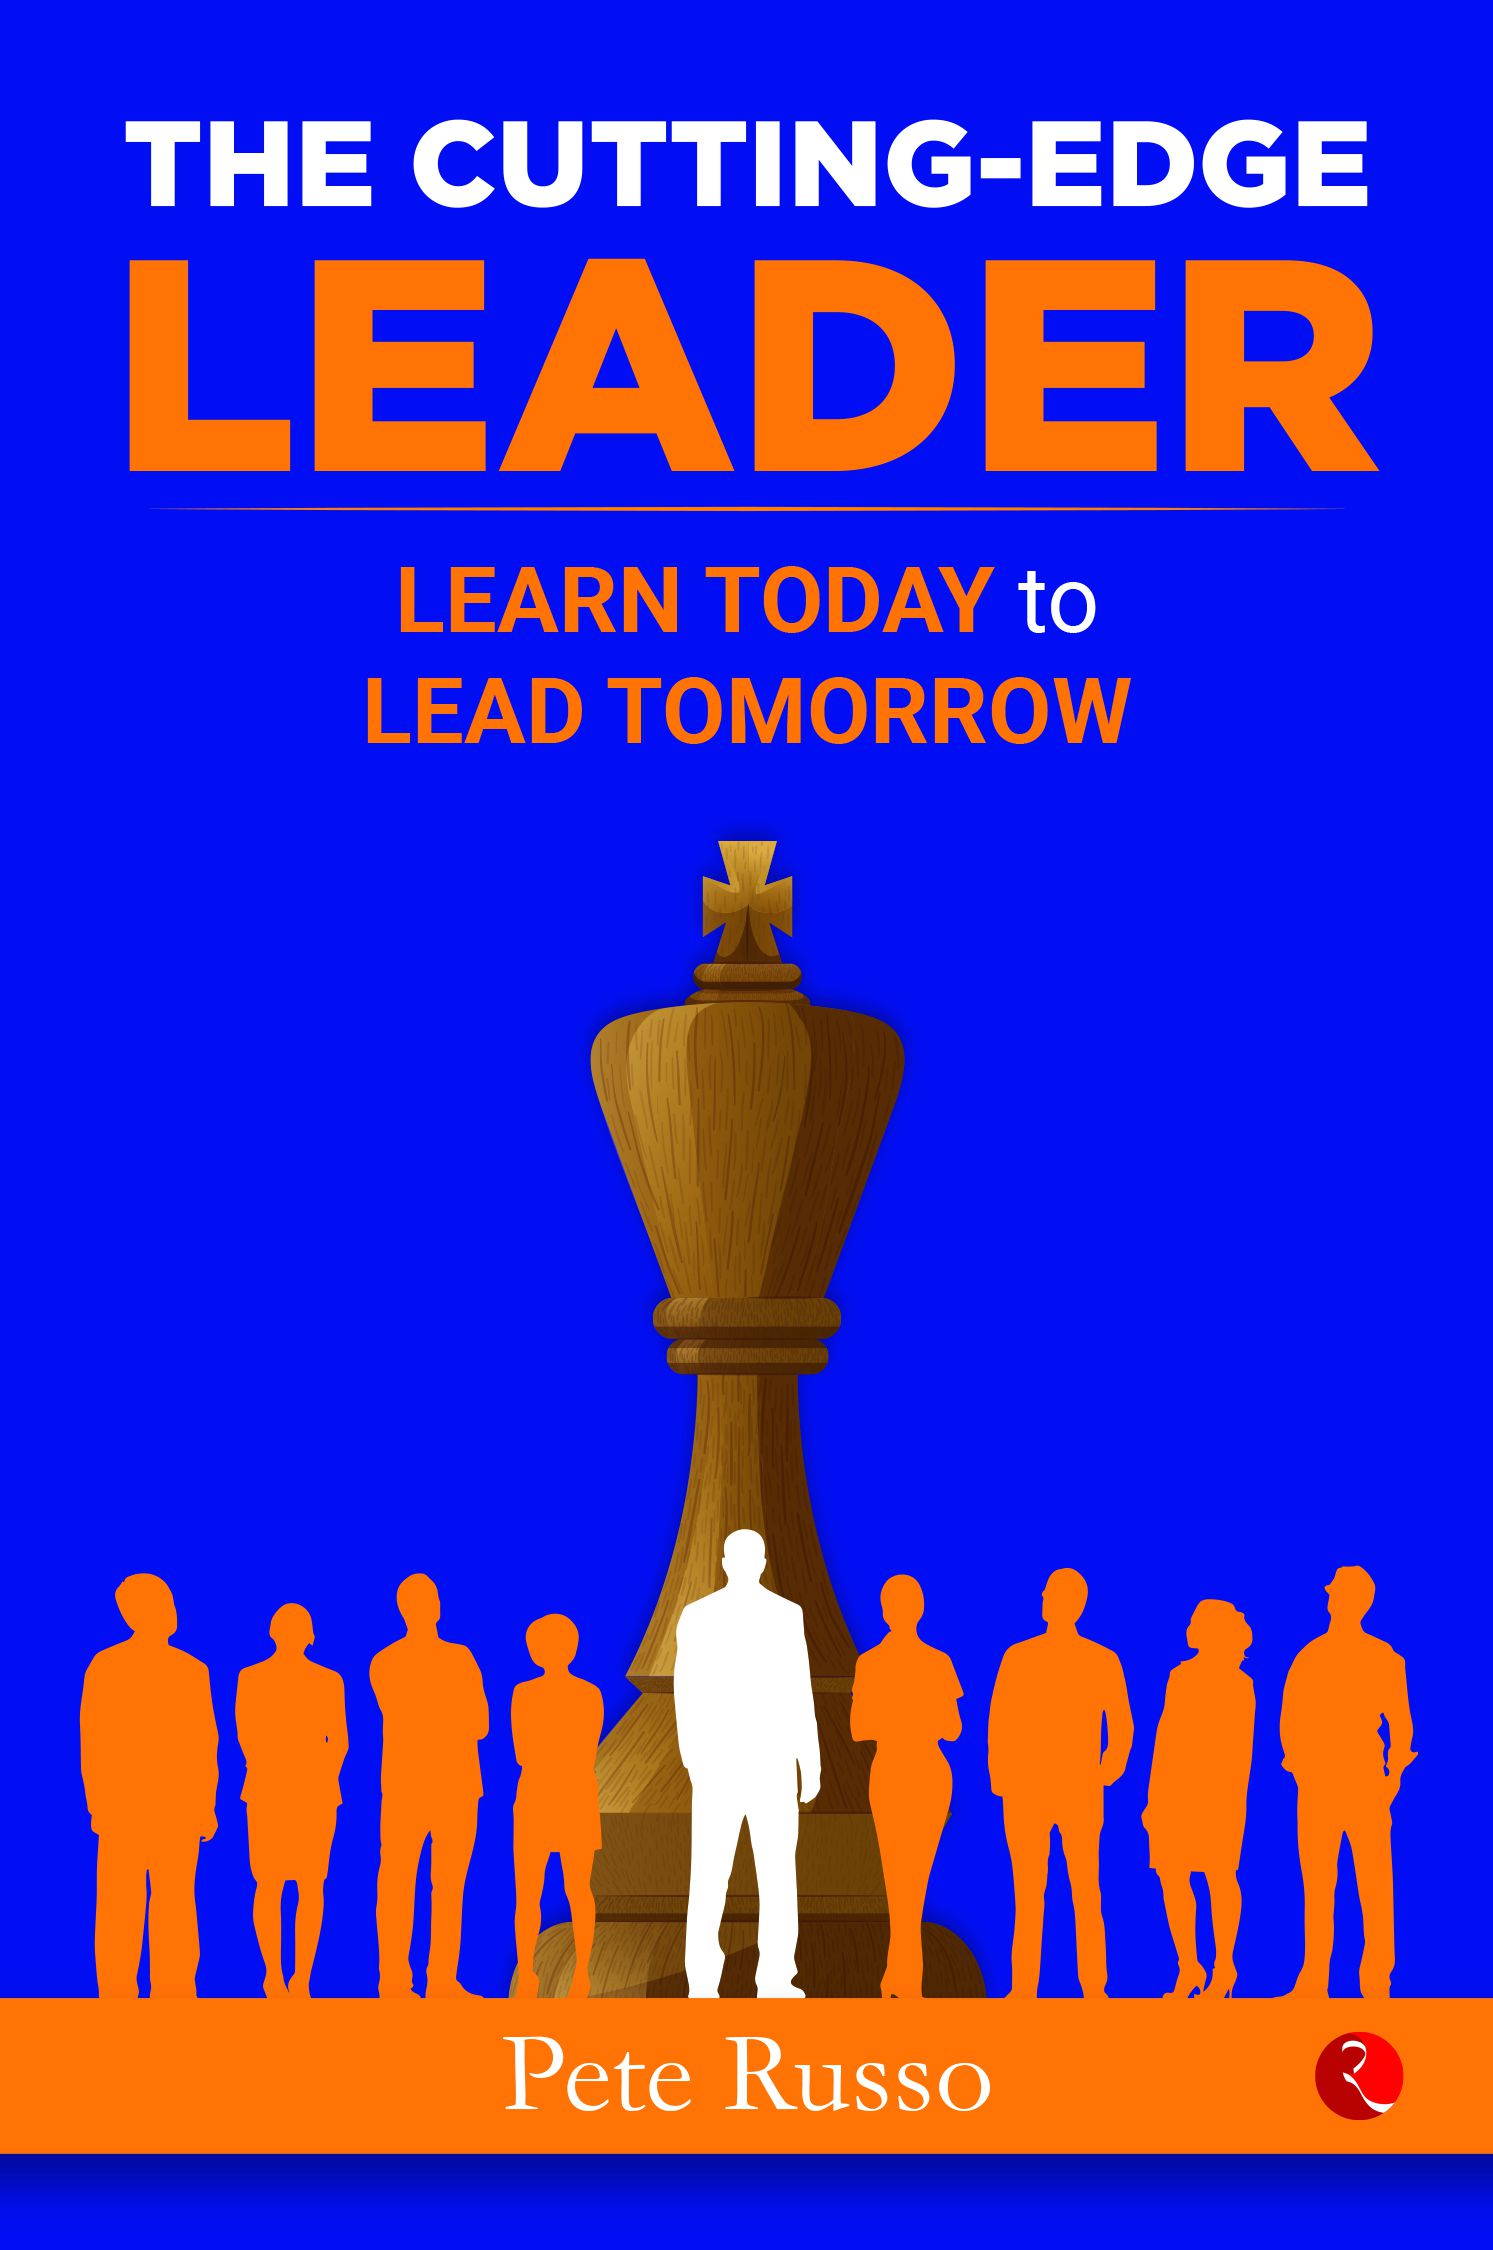     			THE CUTTING-EDGE LEADER : Learn Today to Lead Tomorrow	By Pete Russo